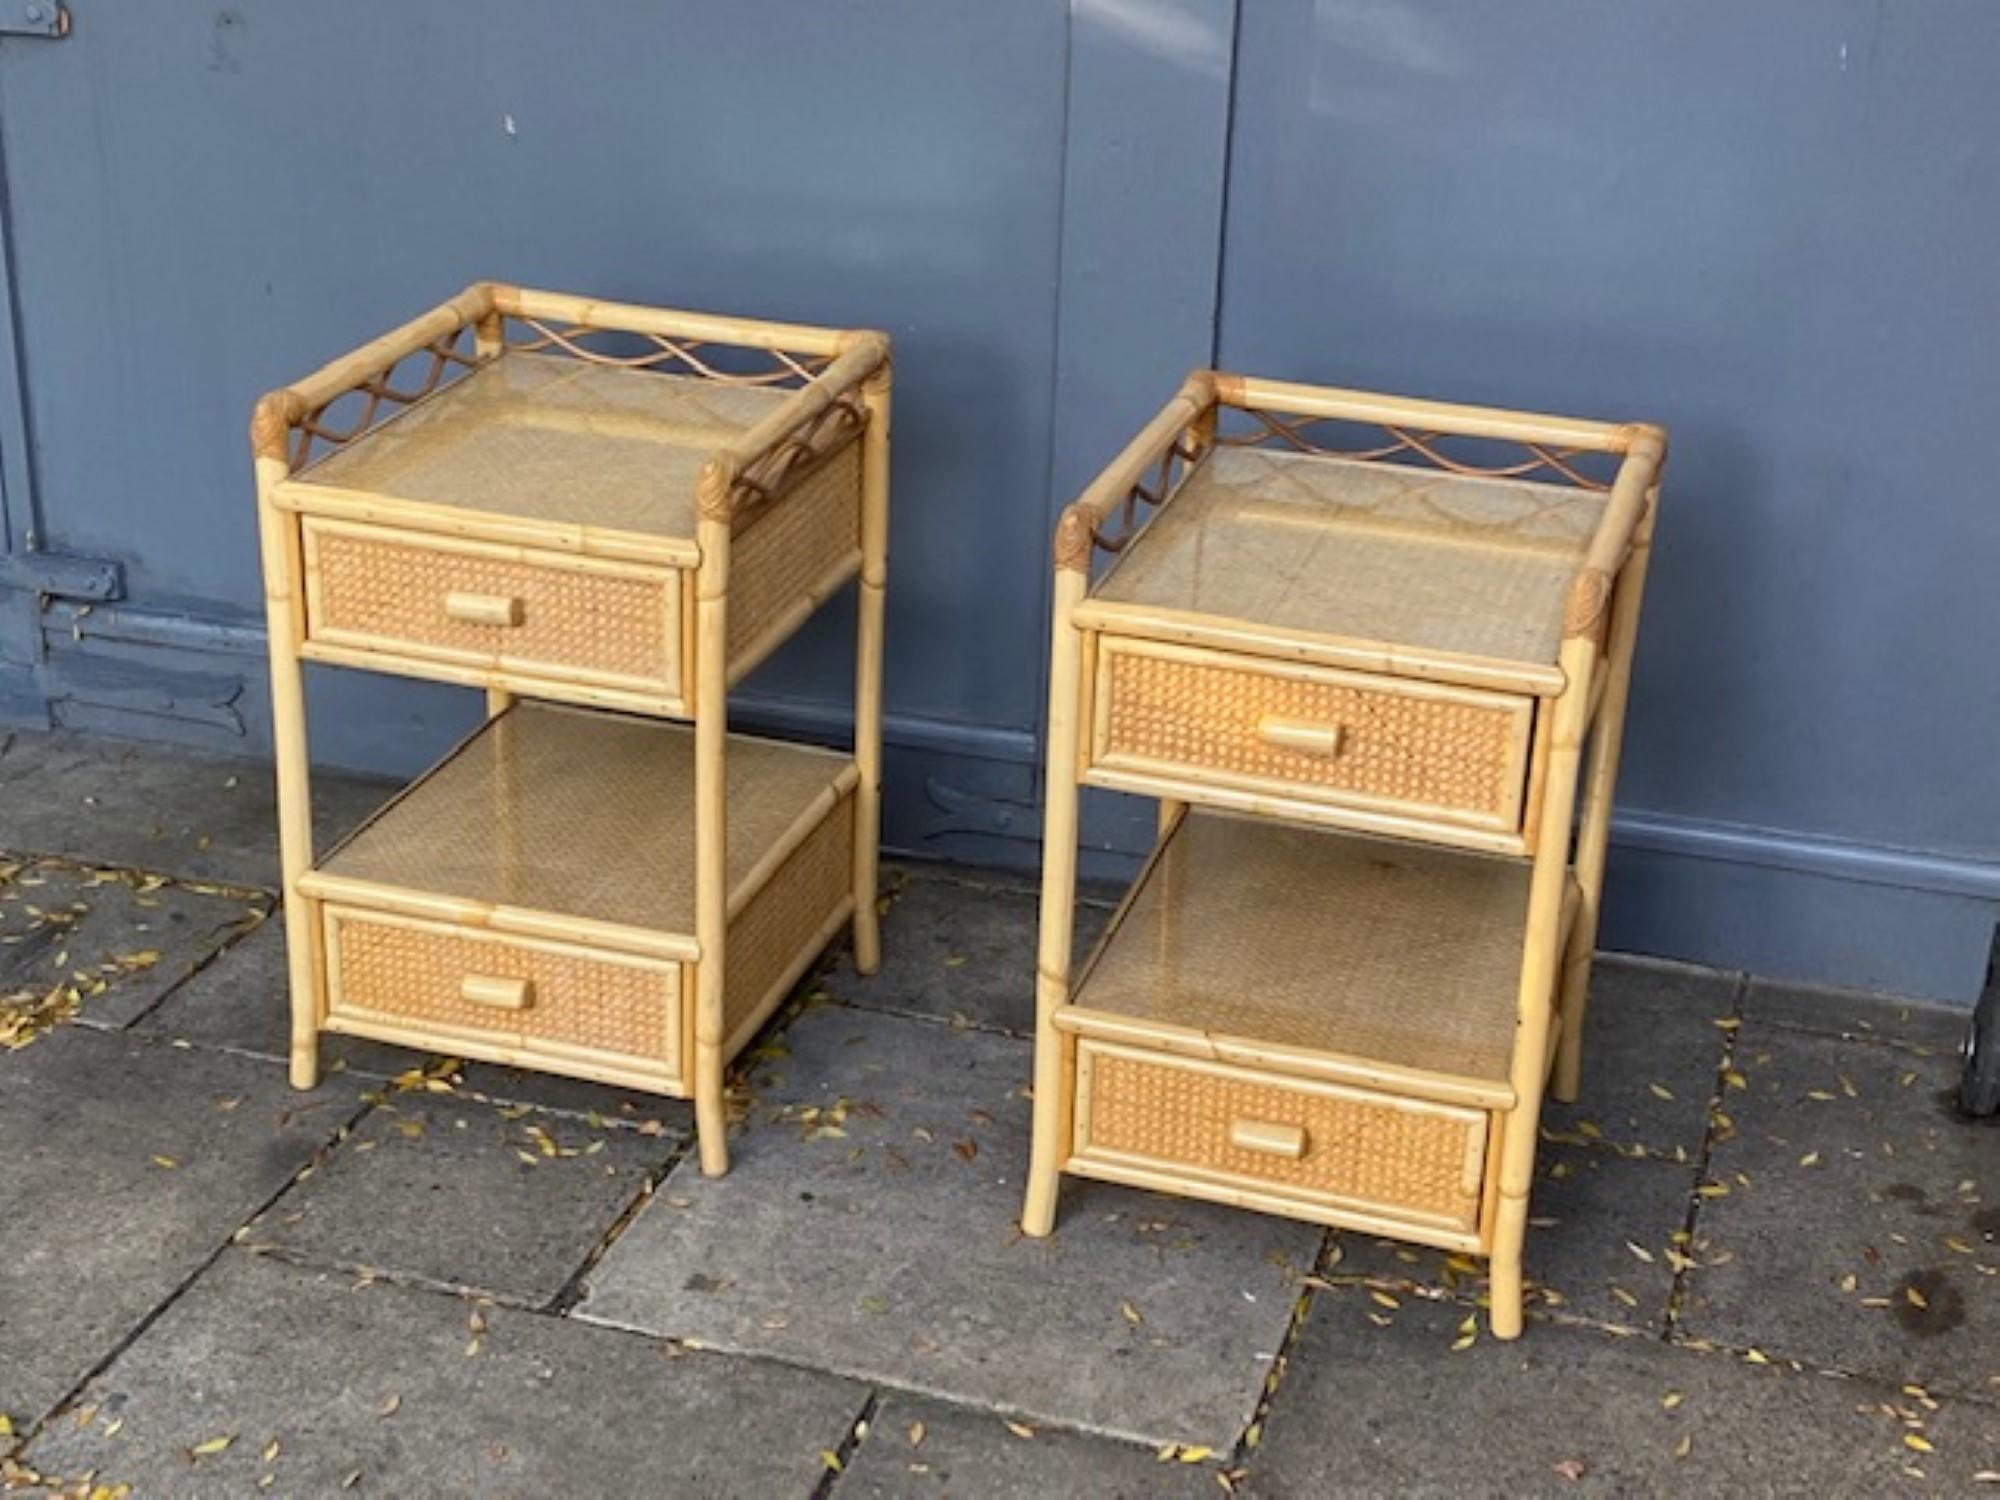 Pair of MCM Rattan / Cane Nightstands / Bedside Tables, Angraves, English, 1970s For Sale 8